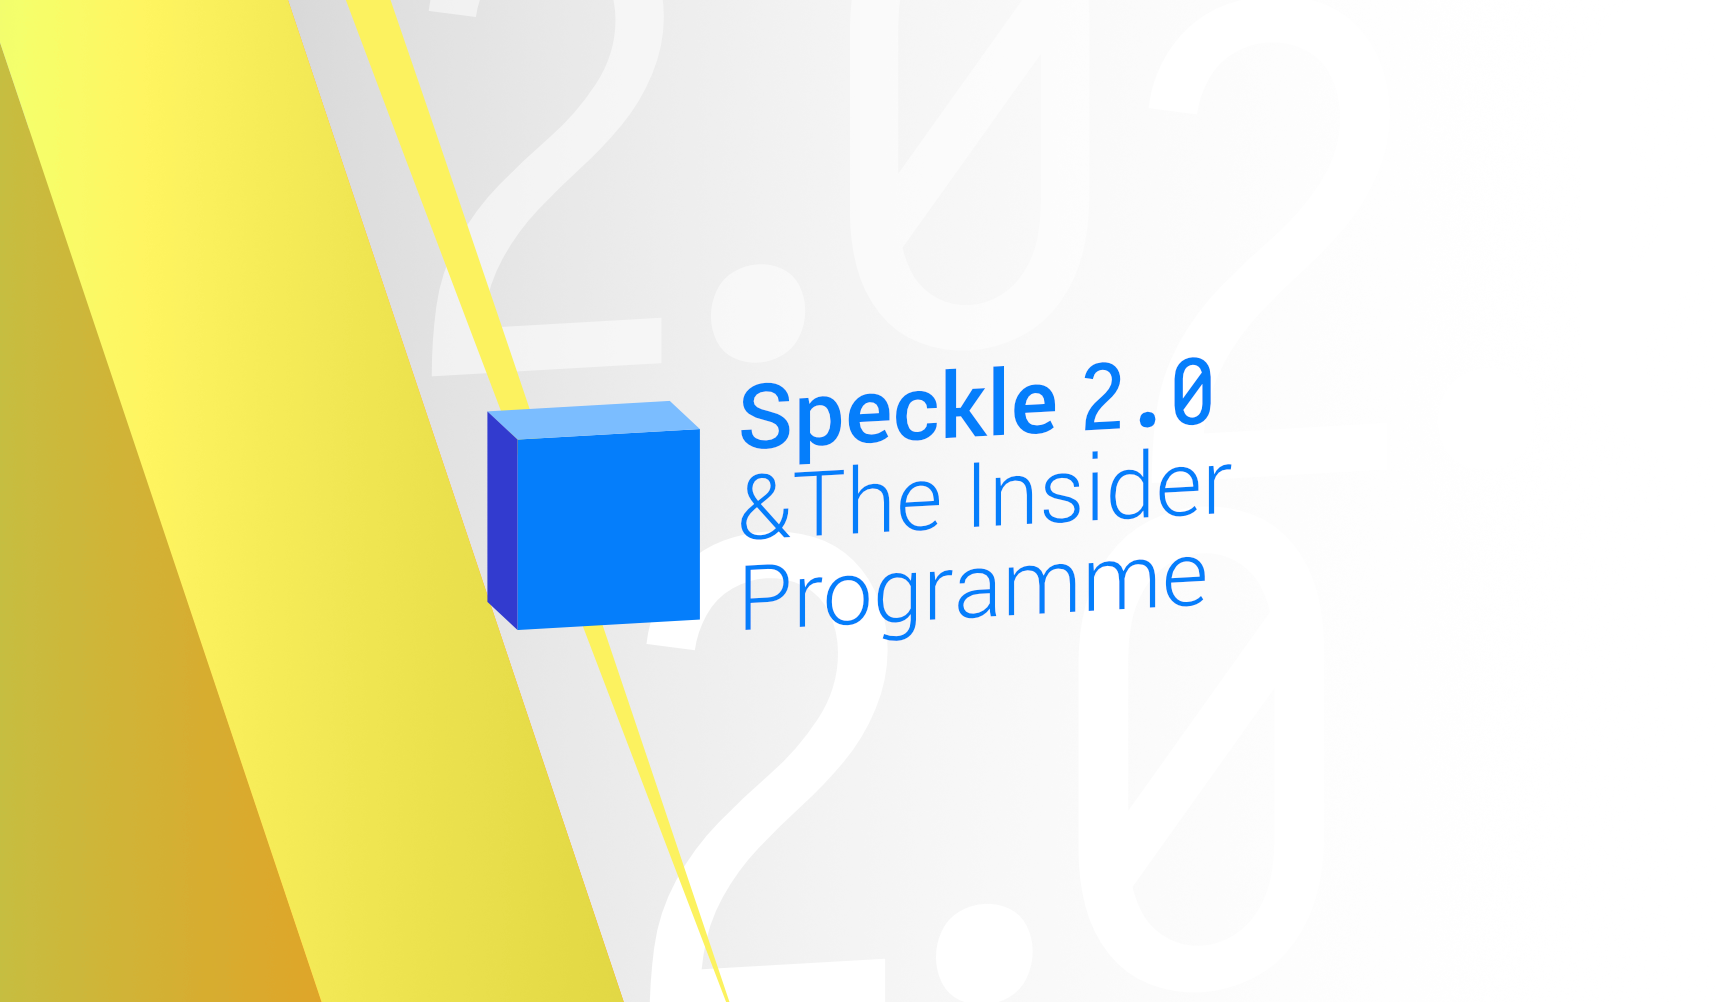 Speckle 2 & The Insider Programme